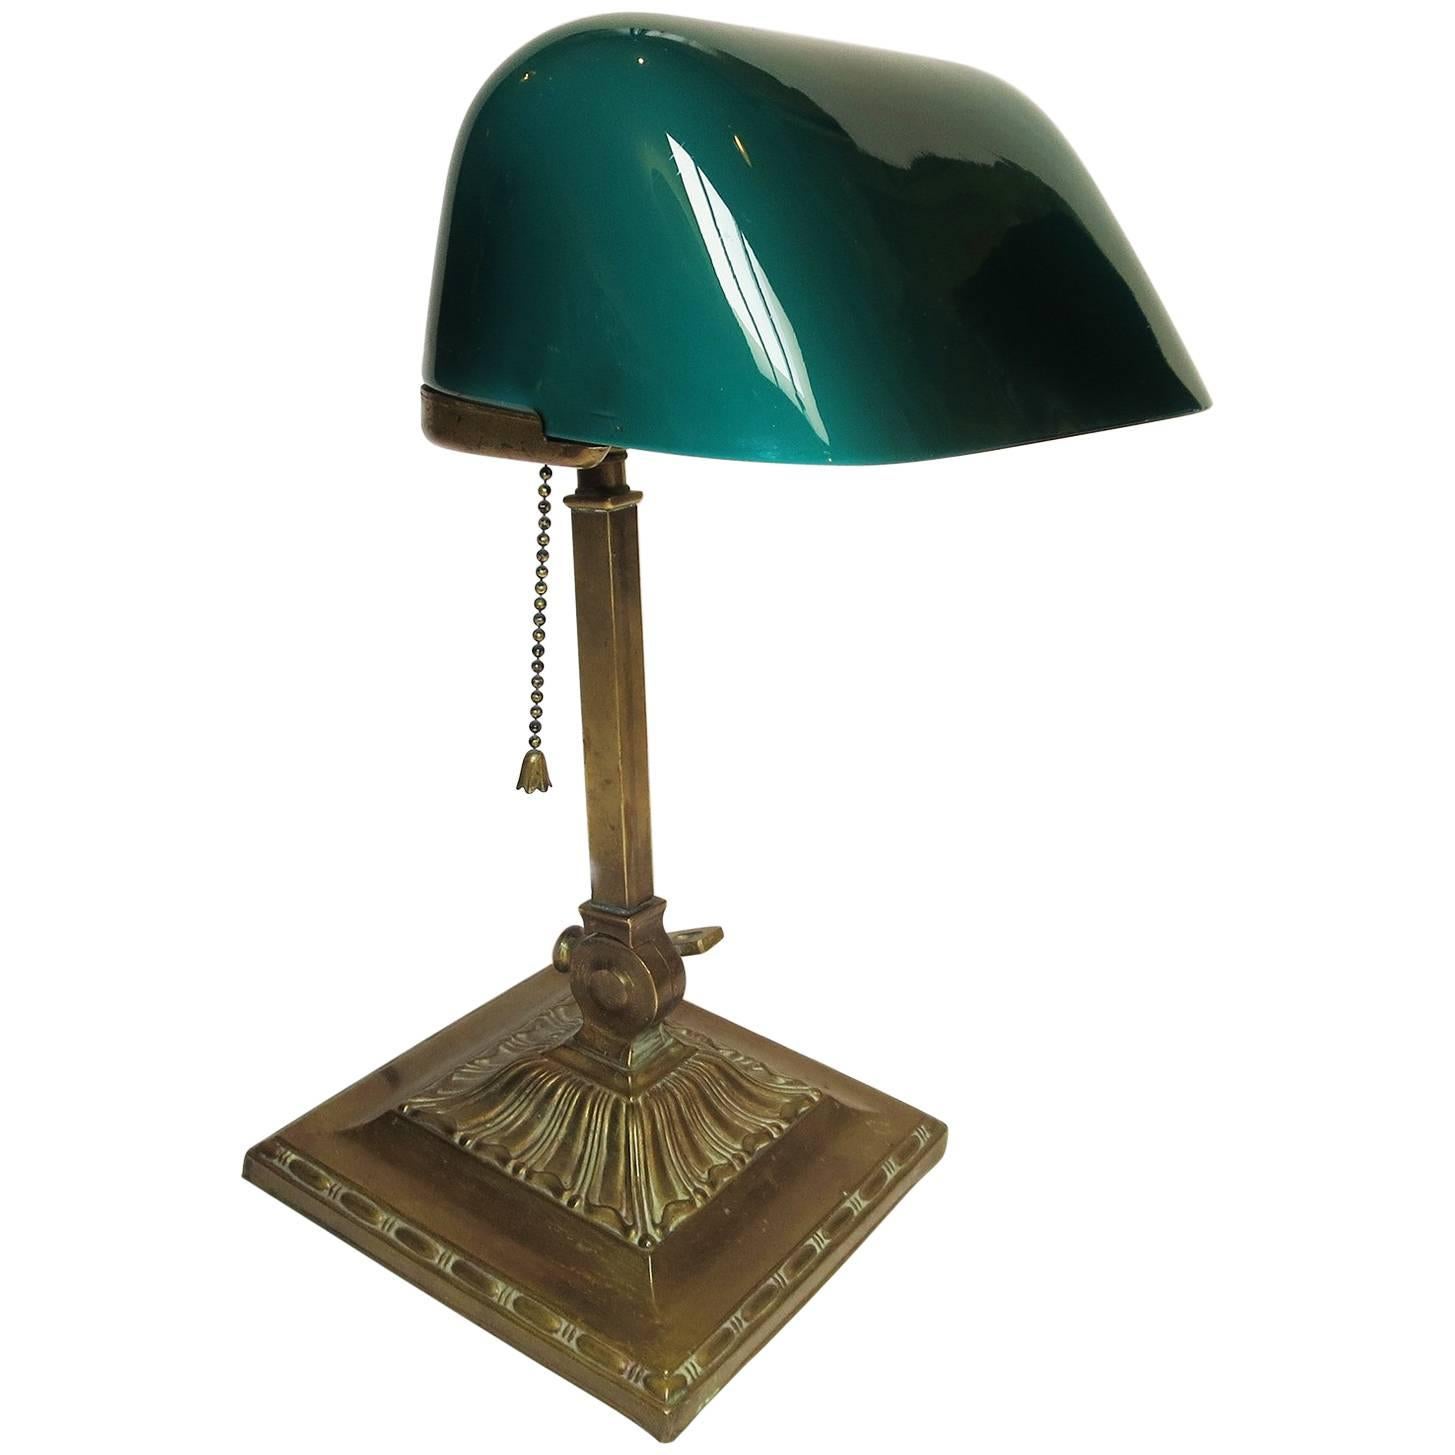 Early Emeralite Single Shade Desk or Library Lamp